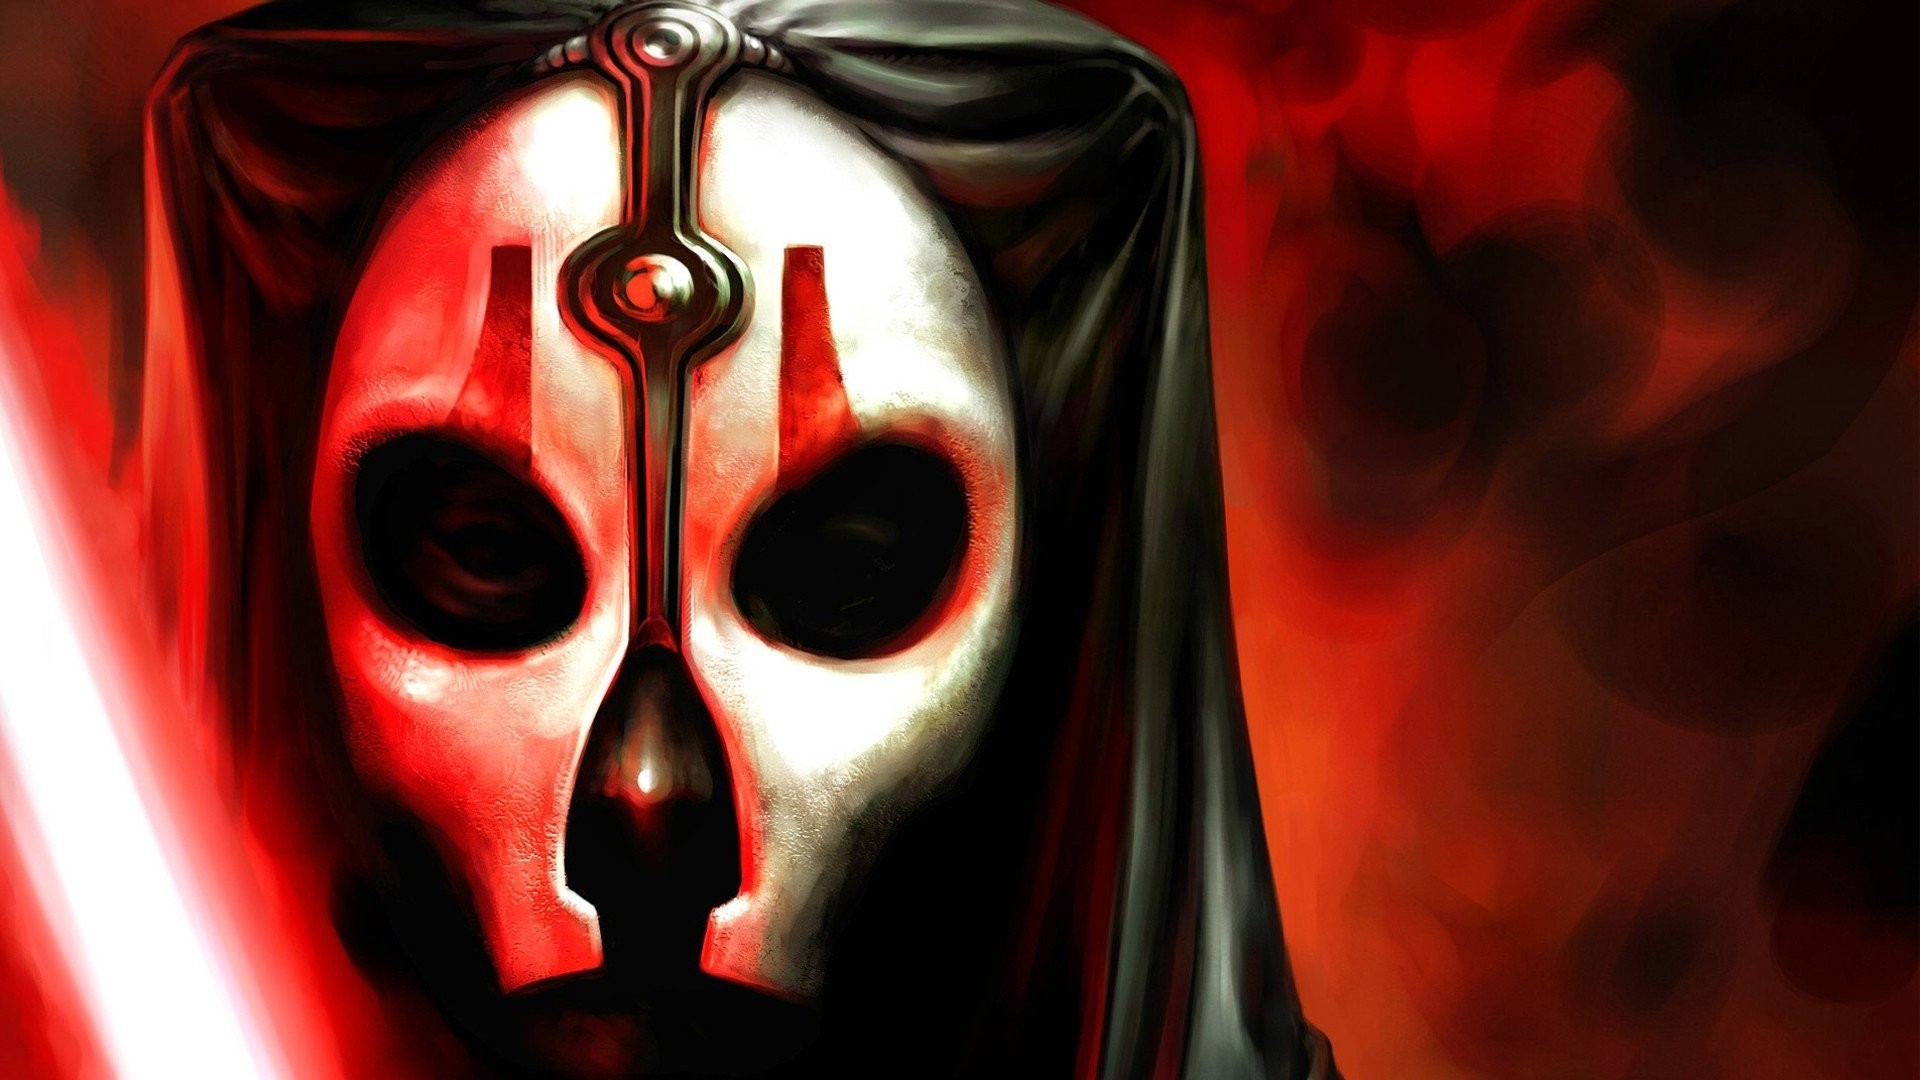 1920x1080 Star Wars Sith Wallpapers Photo As Wallpaper HD